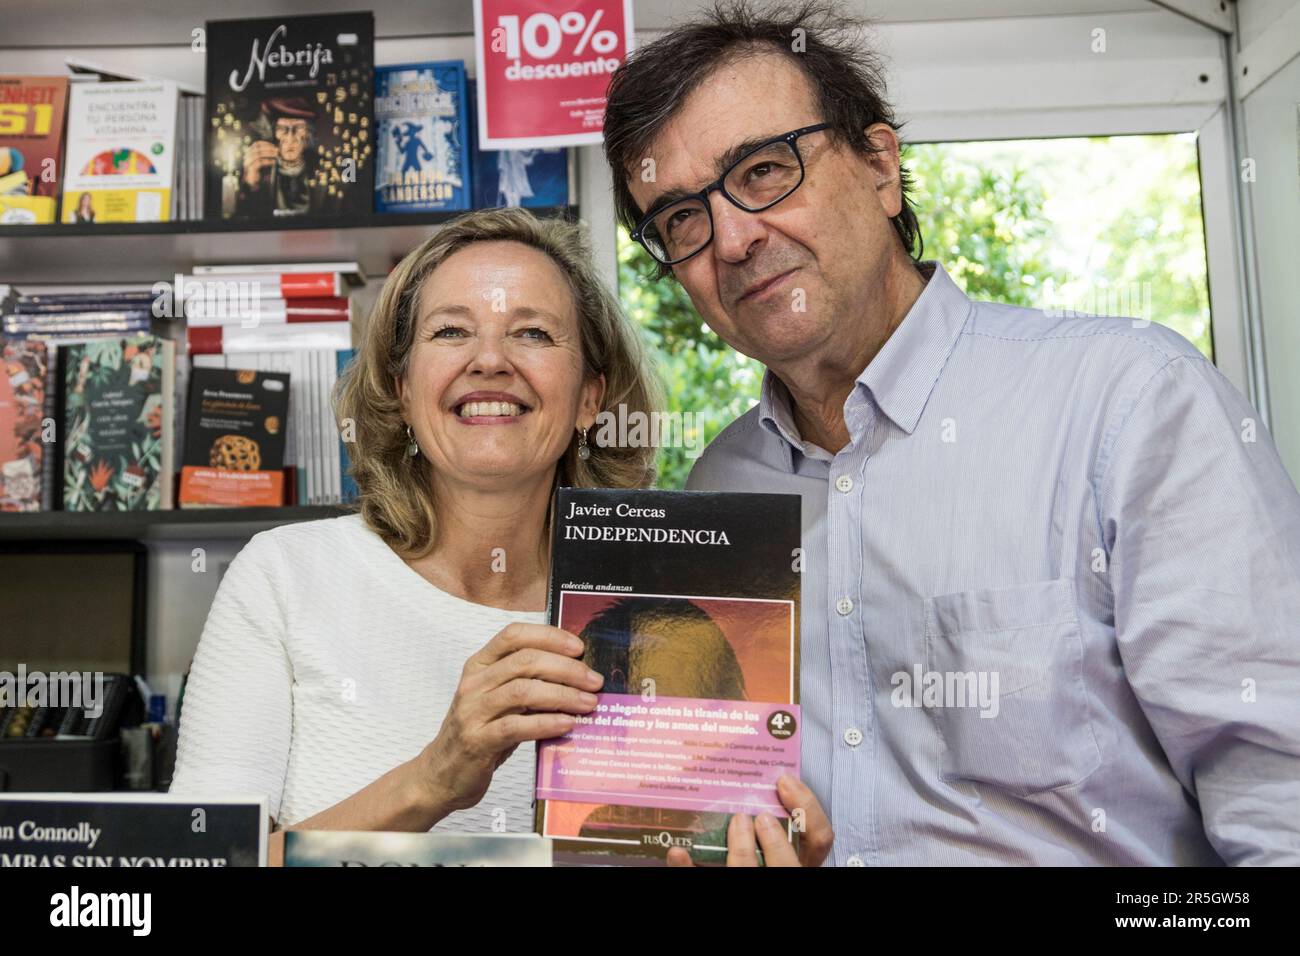 THE WRITER JAVIER CERCAS AND NADIA CALVIÑO VICE PRESIDENT OF THE GOVERNMENT AT THE 82ND EDITION OF THE BOOK FAIR IN EL RETIRO PARK MADRID Credit: agefotostock /Alamy Live News Stock Photo